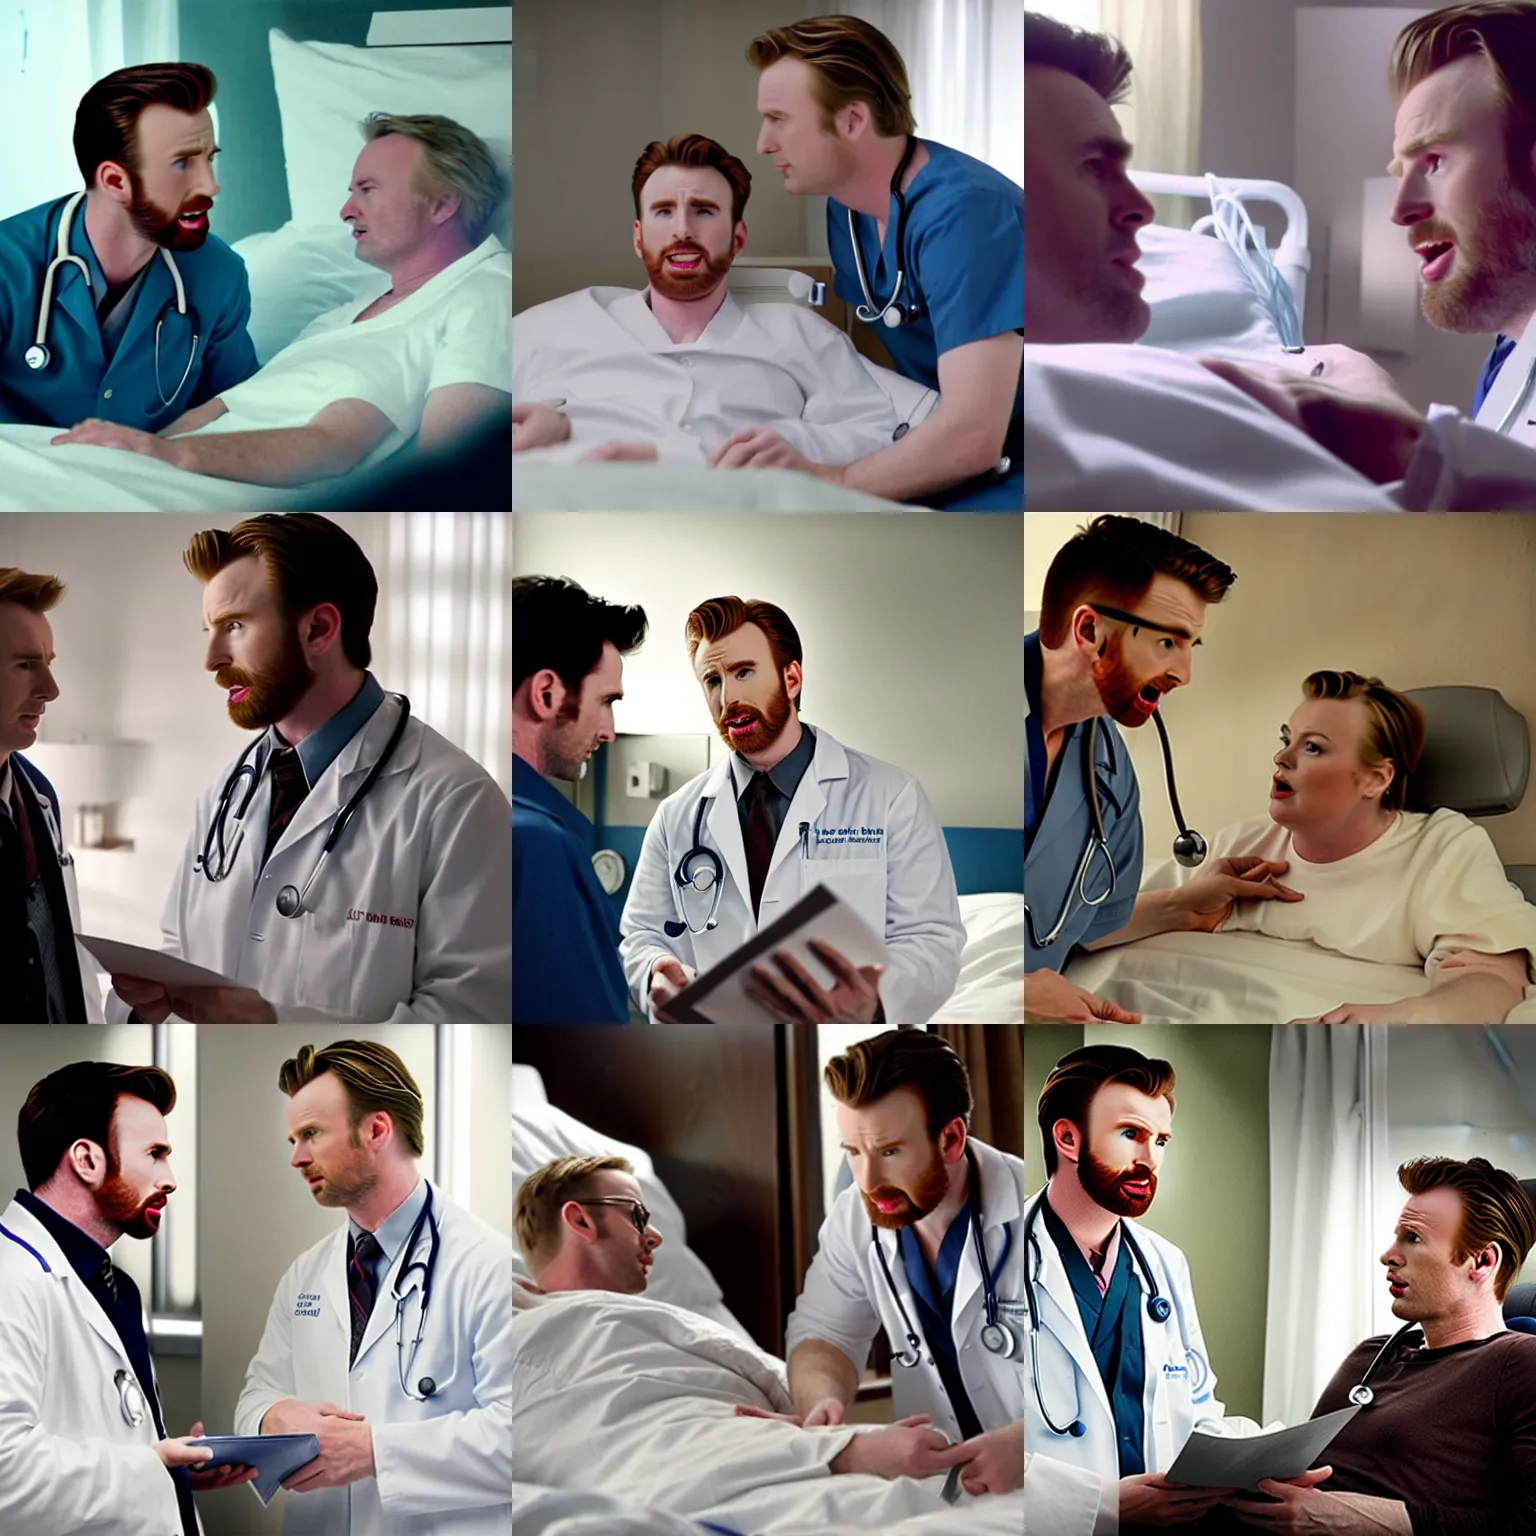 Prompt: a movie scene featuring Chris Evans as a doctor talking with a sick patient in bed who is Chris Evans, a nurse who is Chris Evans stands nearby with a chart, directed by Christopher Nolan